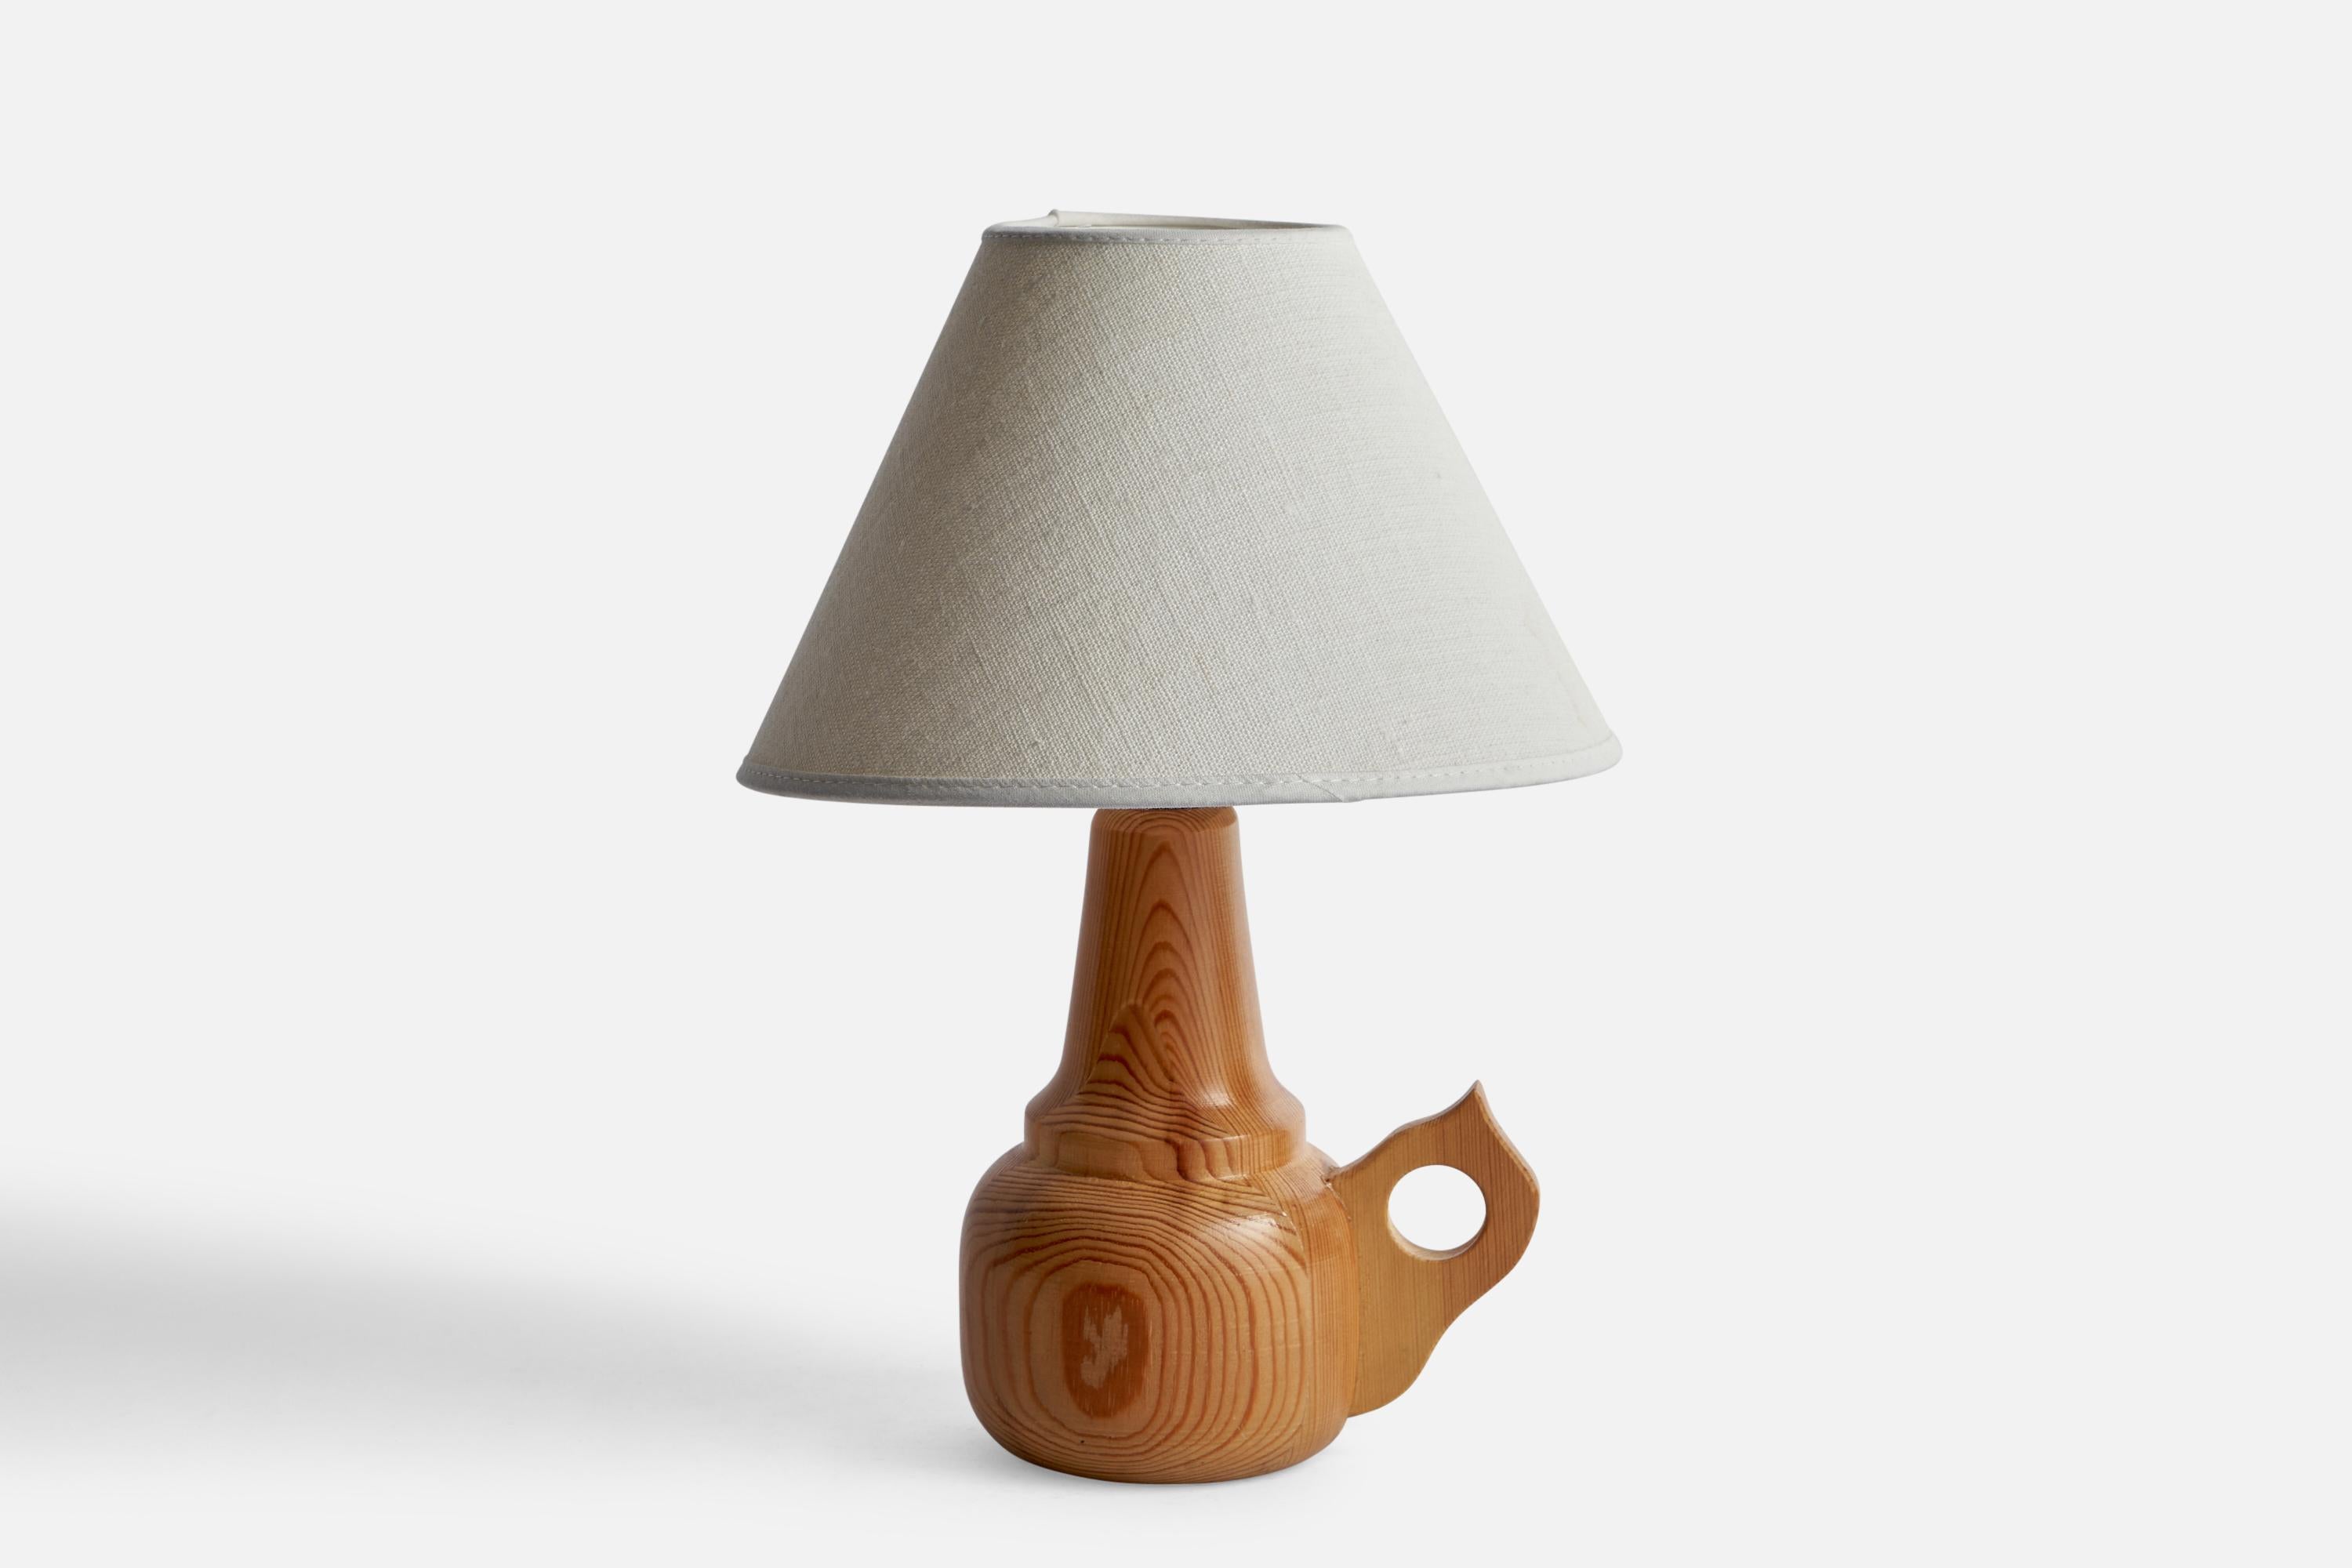 A pine table lamp designed and produced in Sweden, 1970s.

Dimensions of Lamp (inches): 8.1” H x 3.82” W x 5.45” D
Dimensions of Shade (inches): 3” Top Diameter x 8” Bottom Diameter x 5” H
Dimensions of Lamp with Shade (inches): 11.7”H x 8”